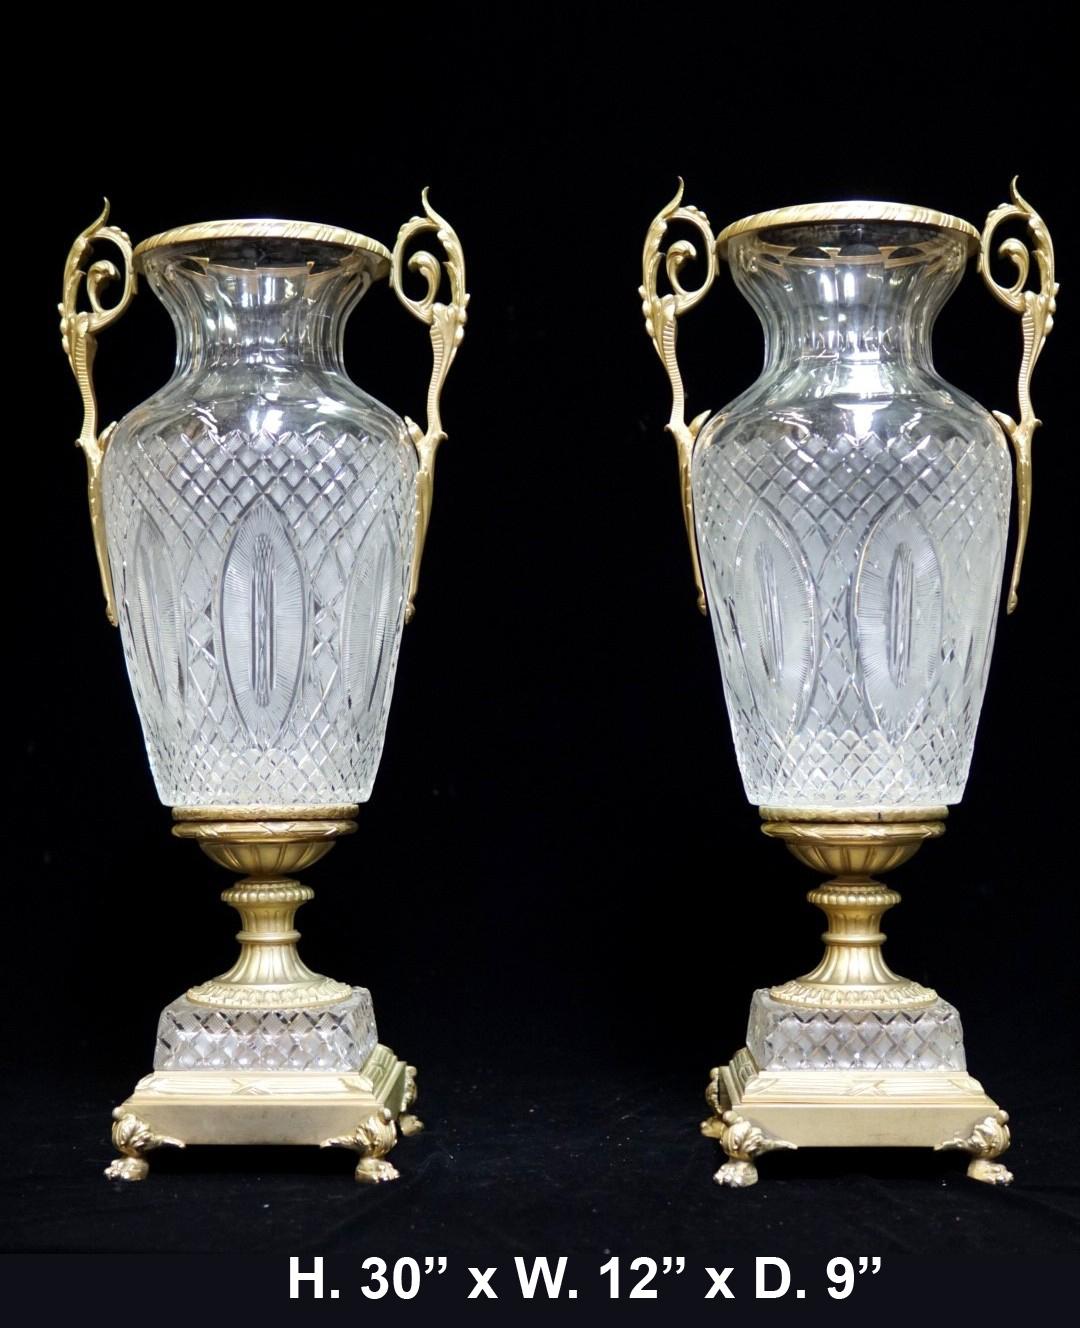 Impressive and large pair of French Louis XVI style ormolu and cut crystal urns,
mid-20th century.  

Each urn is centered by an ovoid shape cut-crystal body flanked by two ormolu handles, over a gilt bronze reeded foot, above a conforming cut